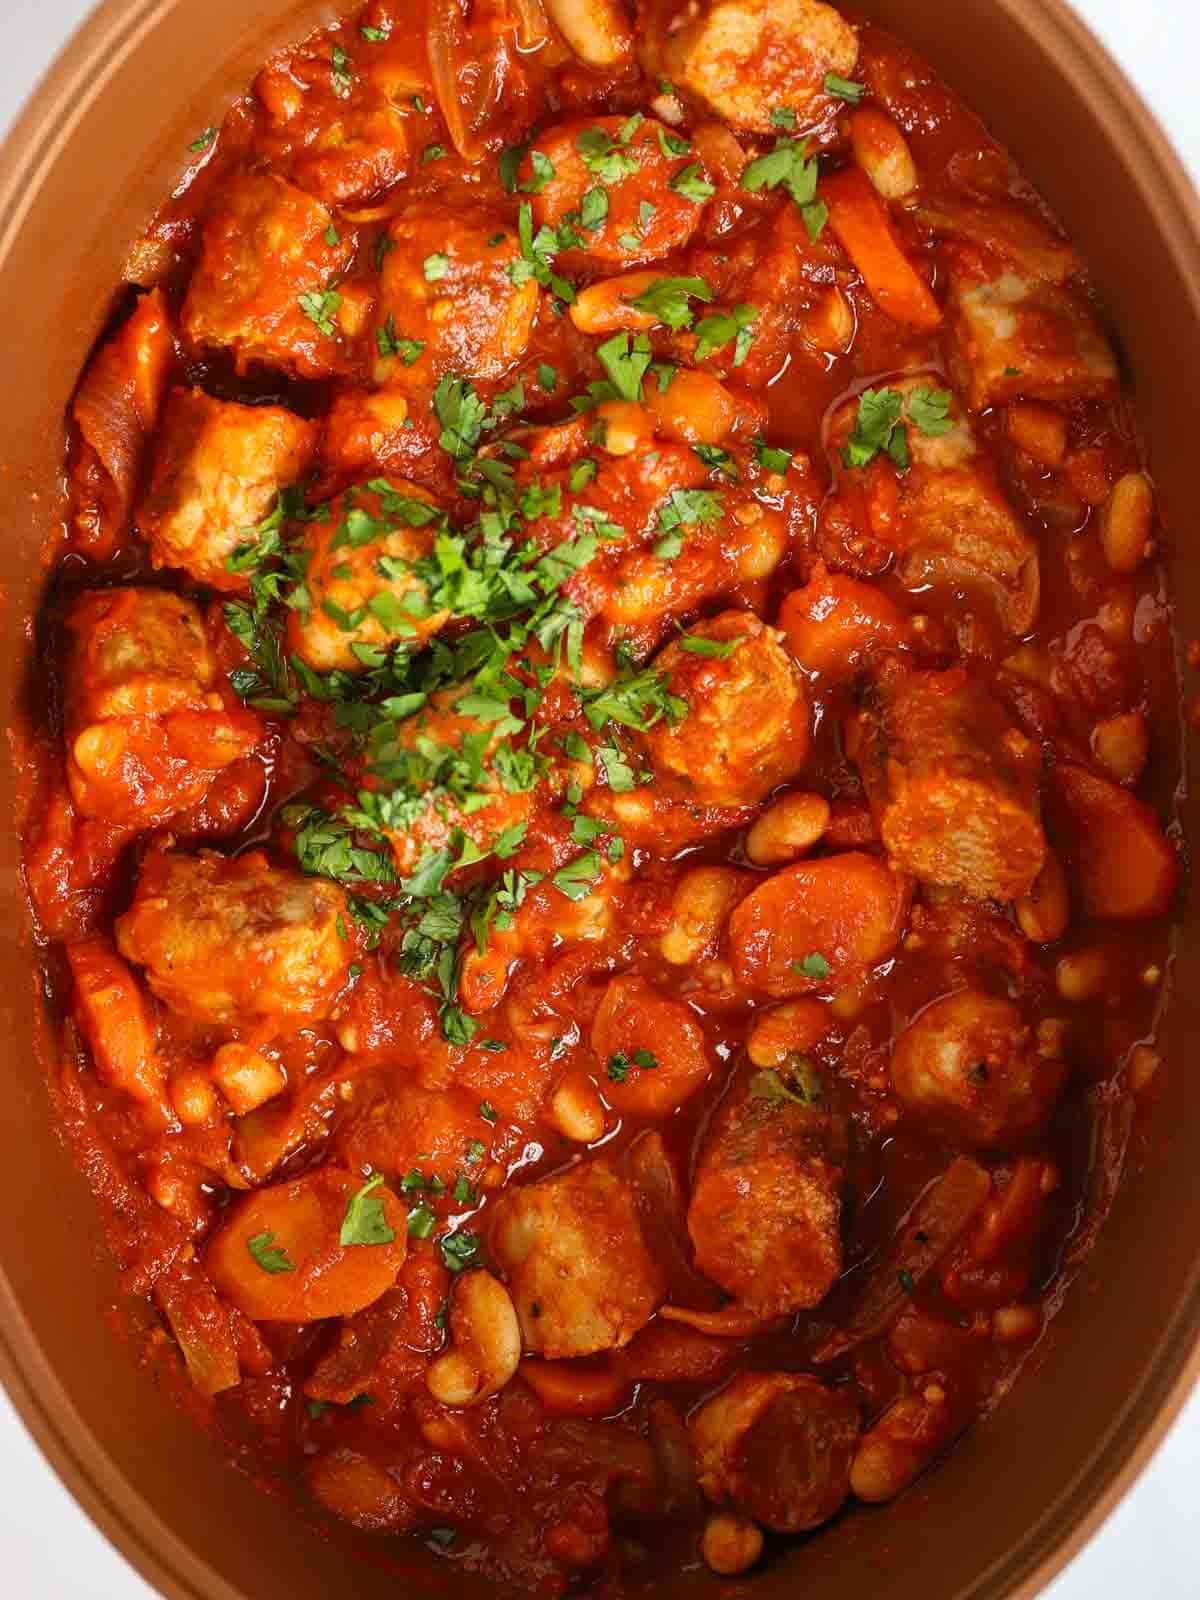 A slow cooker pan with a cooked sausage casserole inside, garnished with parsley.